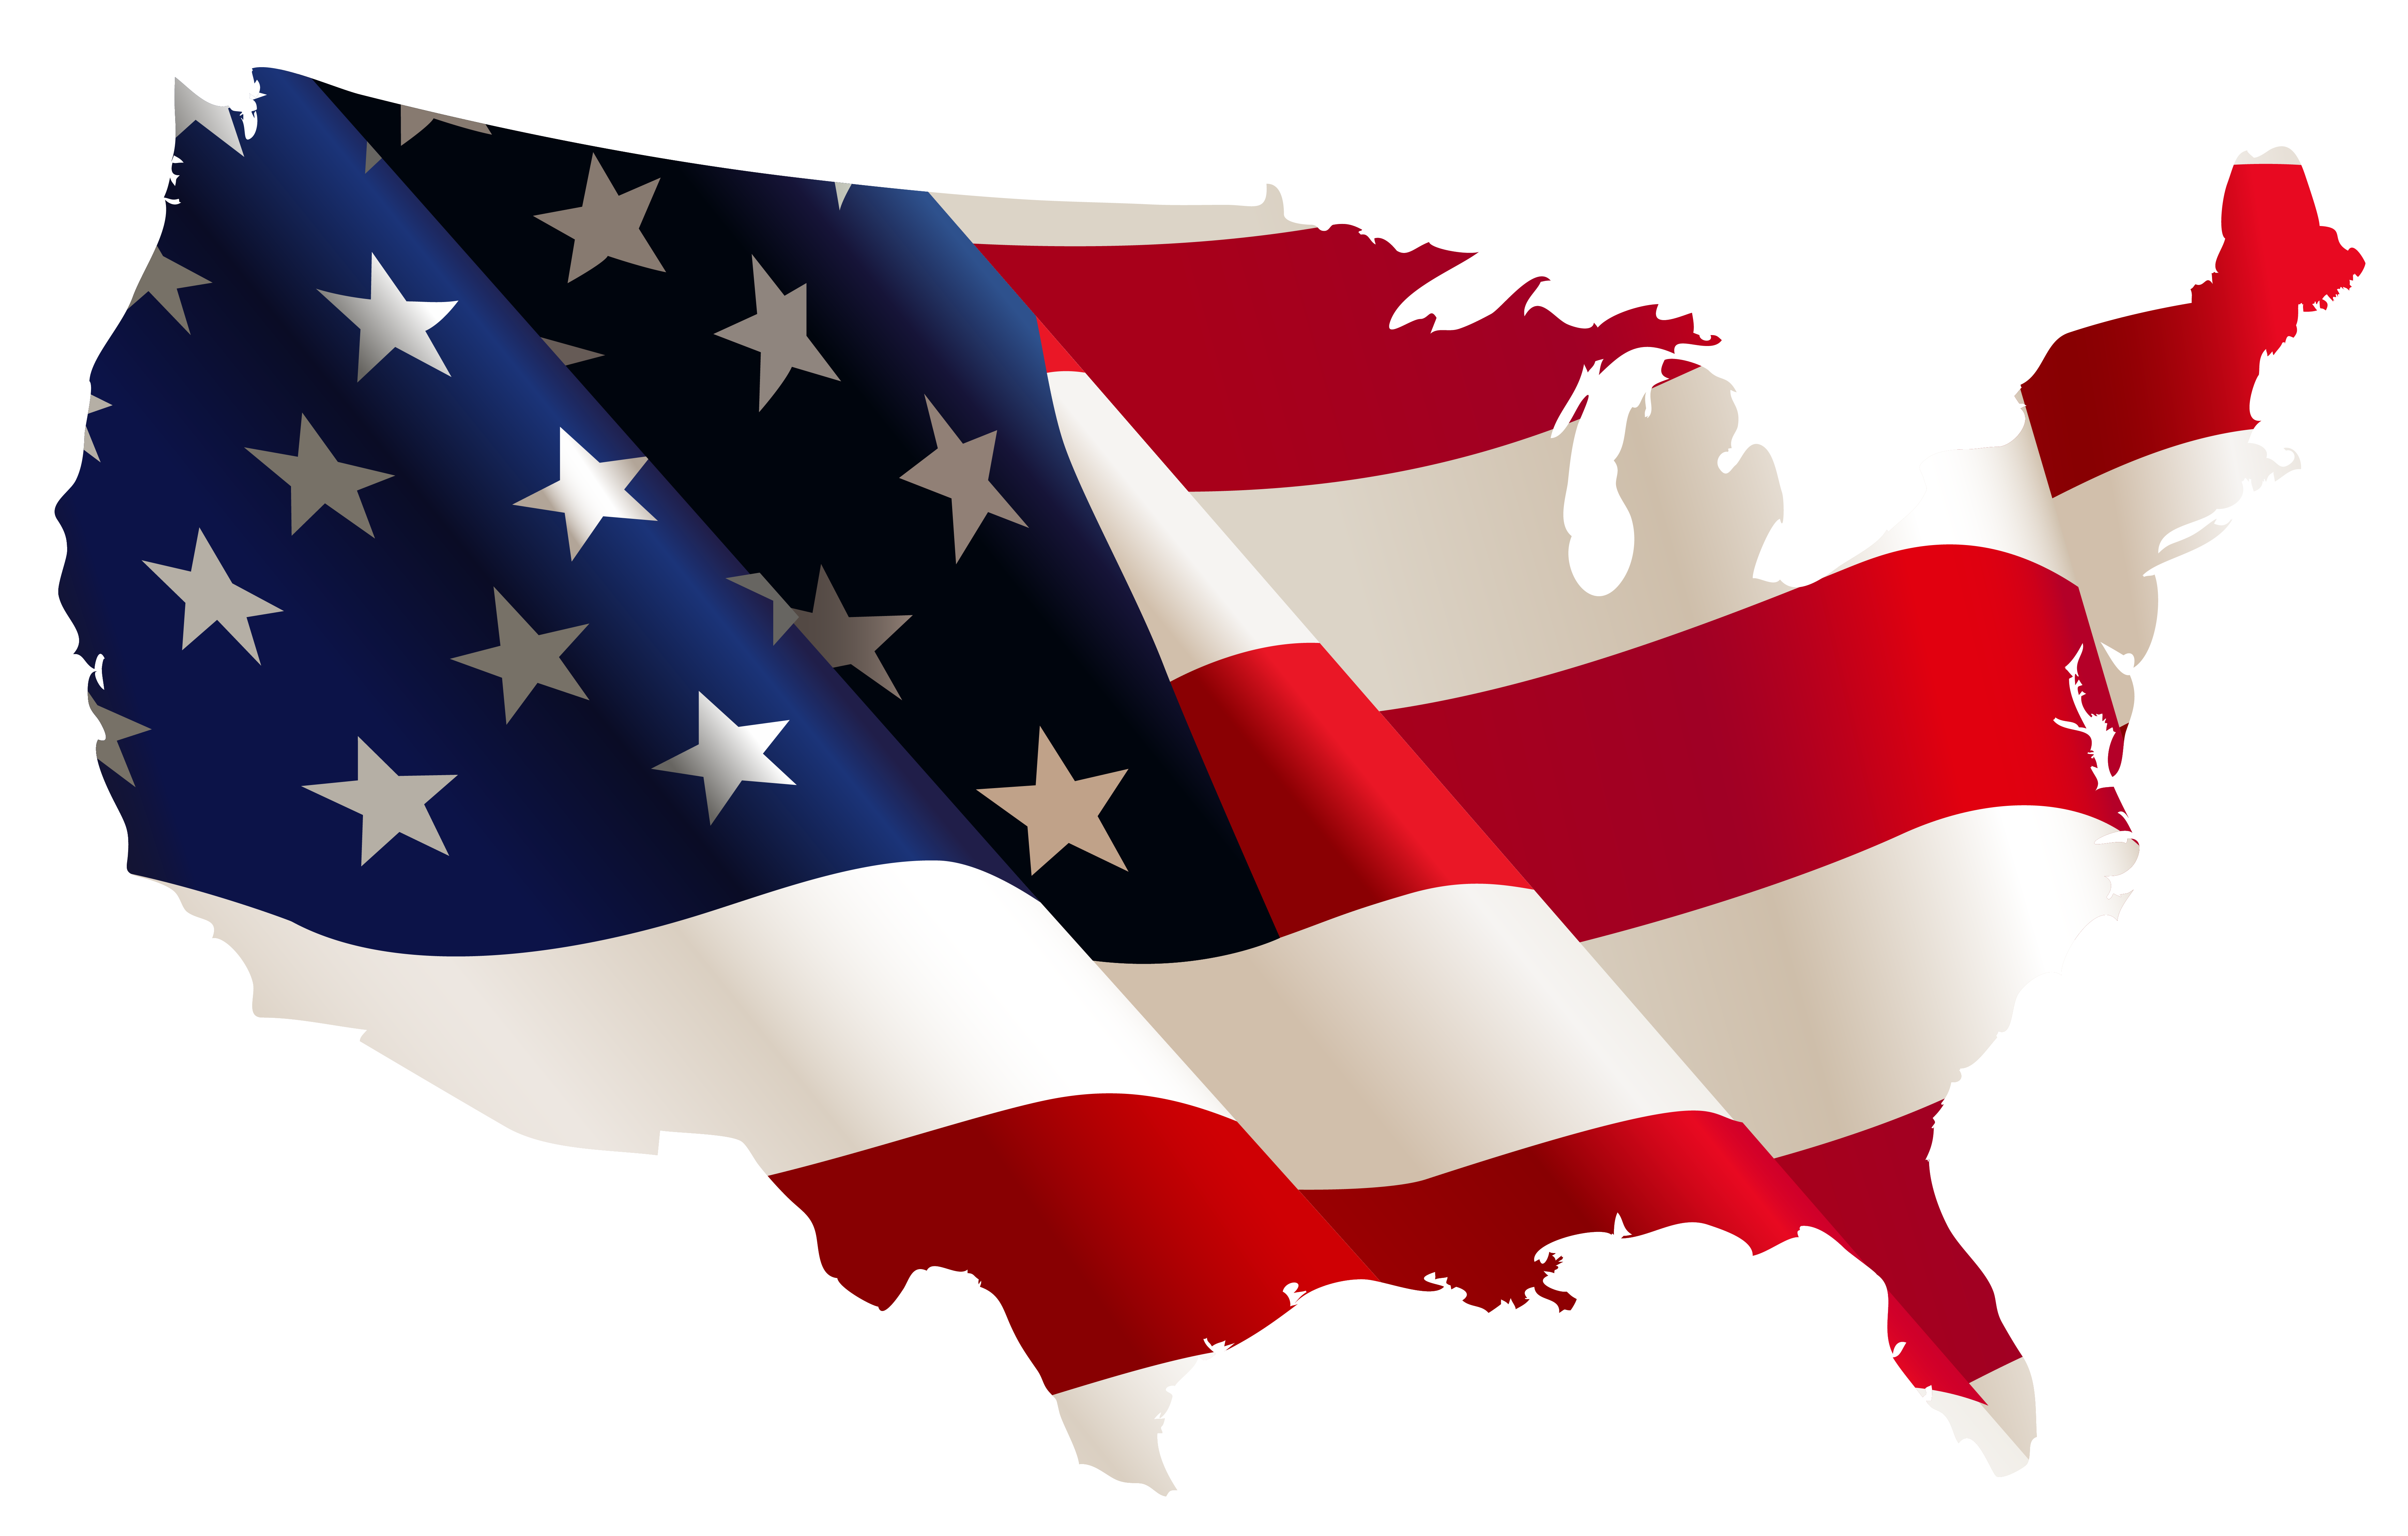 USA Flag Map PNG Clipart